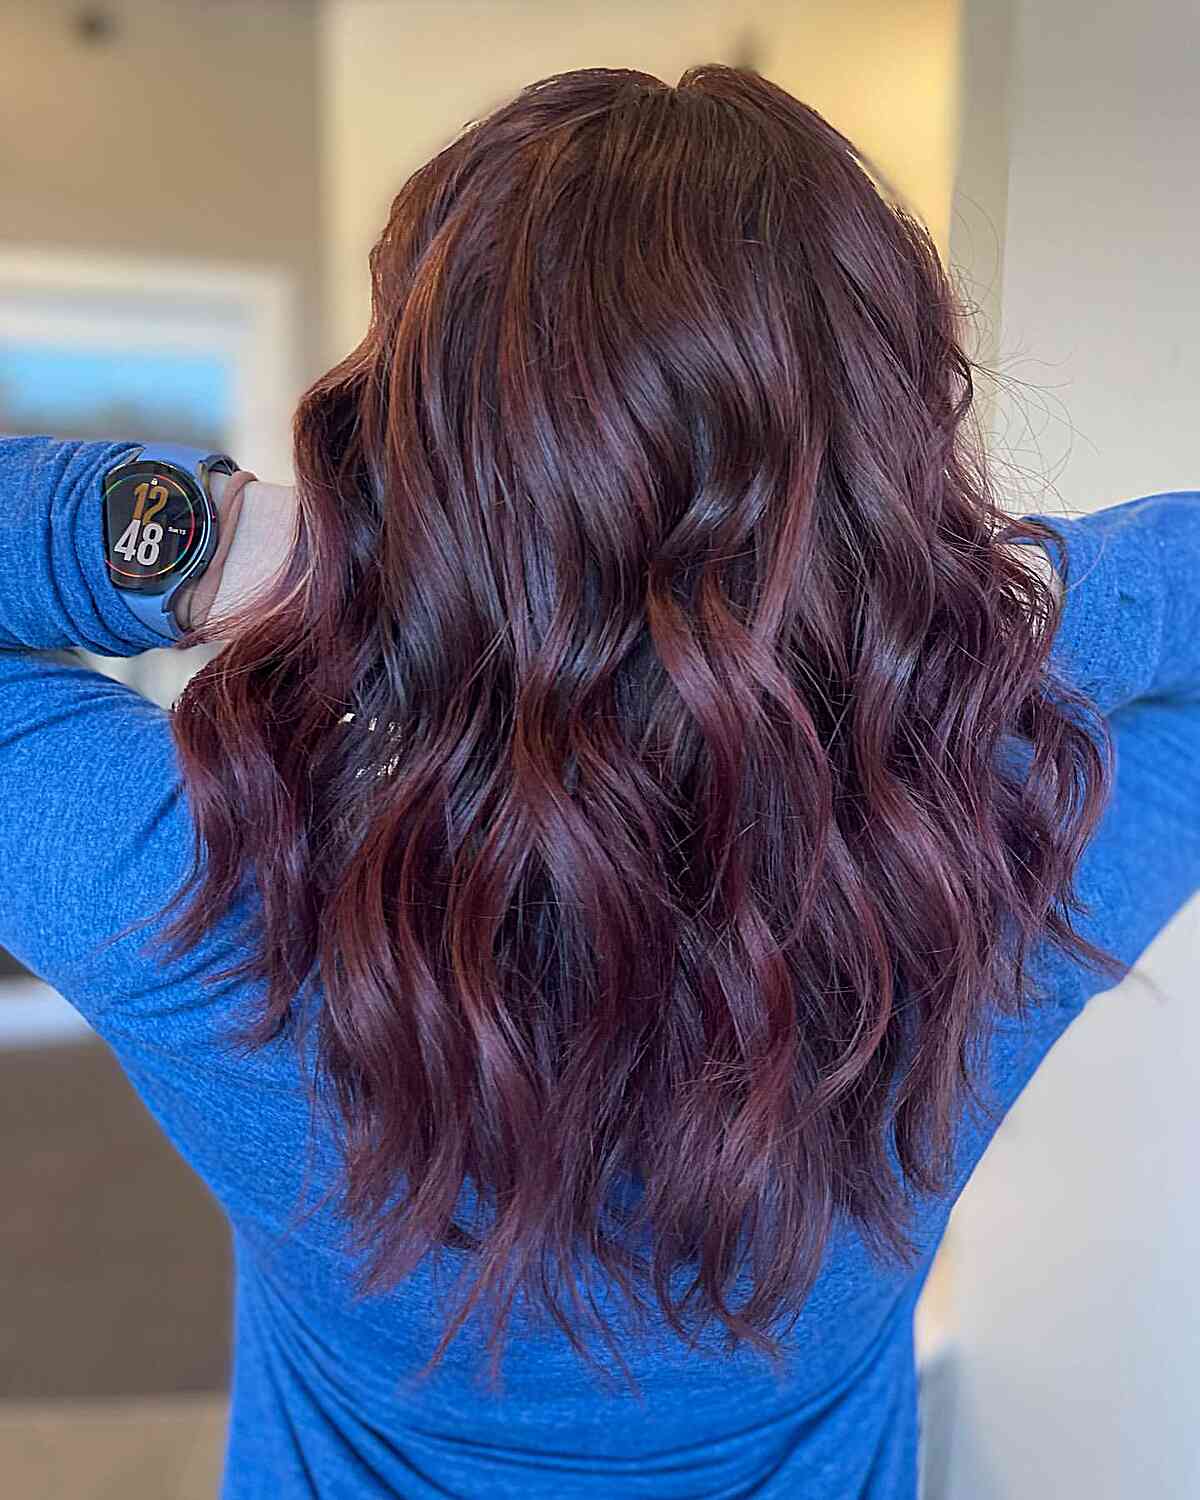 Cool-Toned Maroon Babylights for Medium Layered Hair